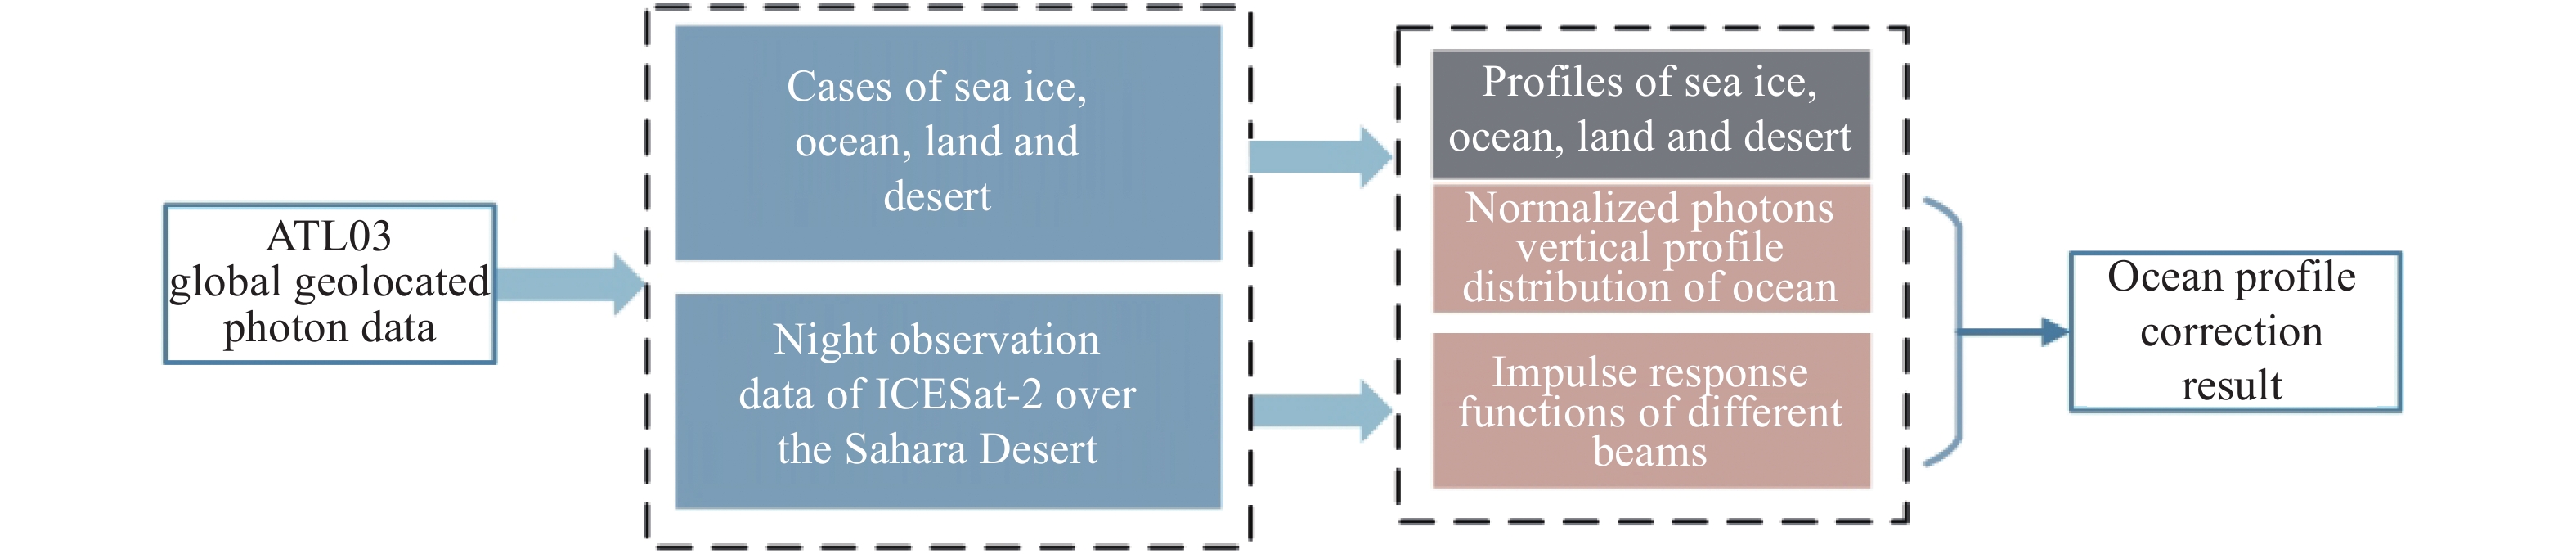 Flow chart of ATLAS/ICESAT-2 data preprocessing and calibration